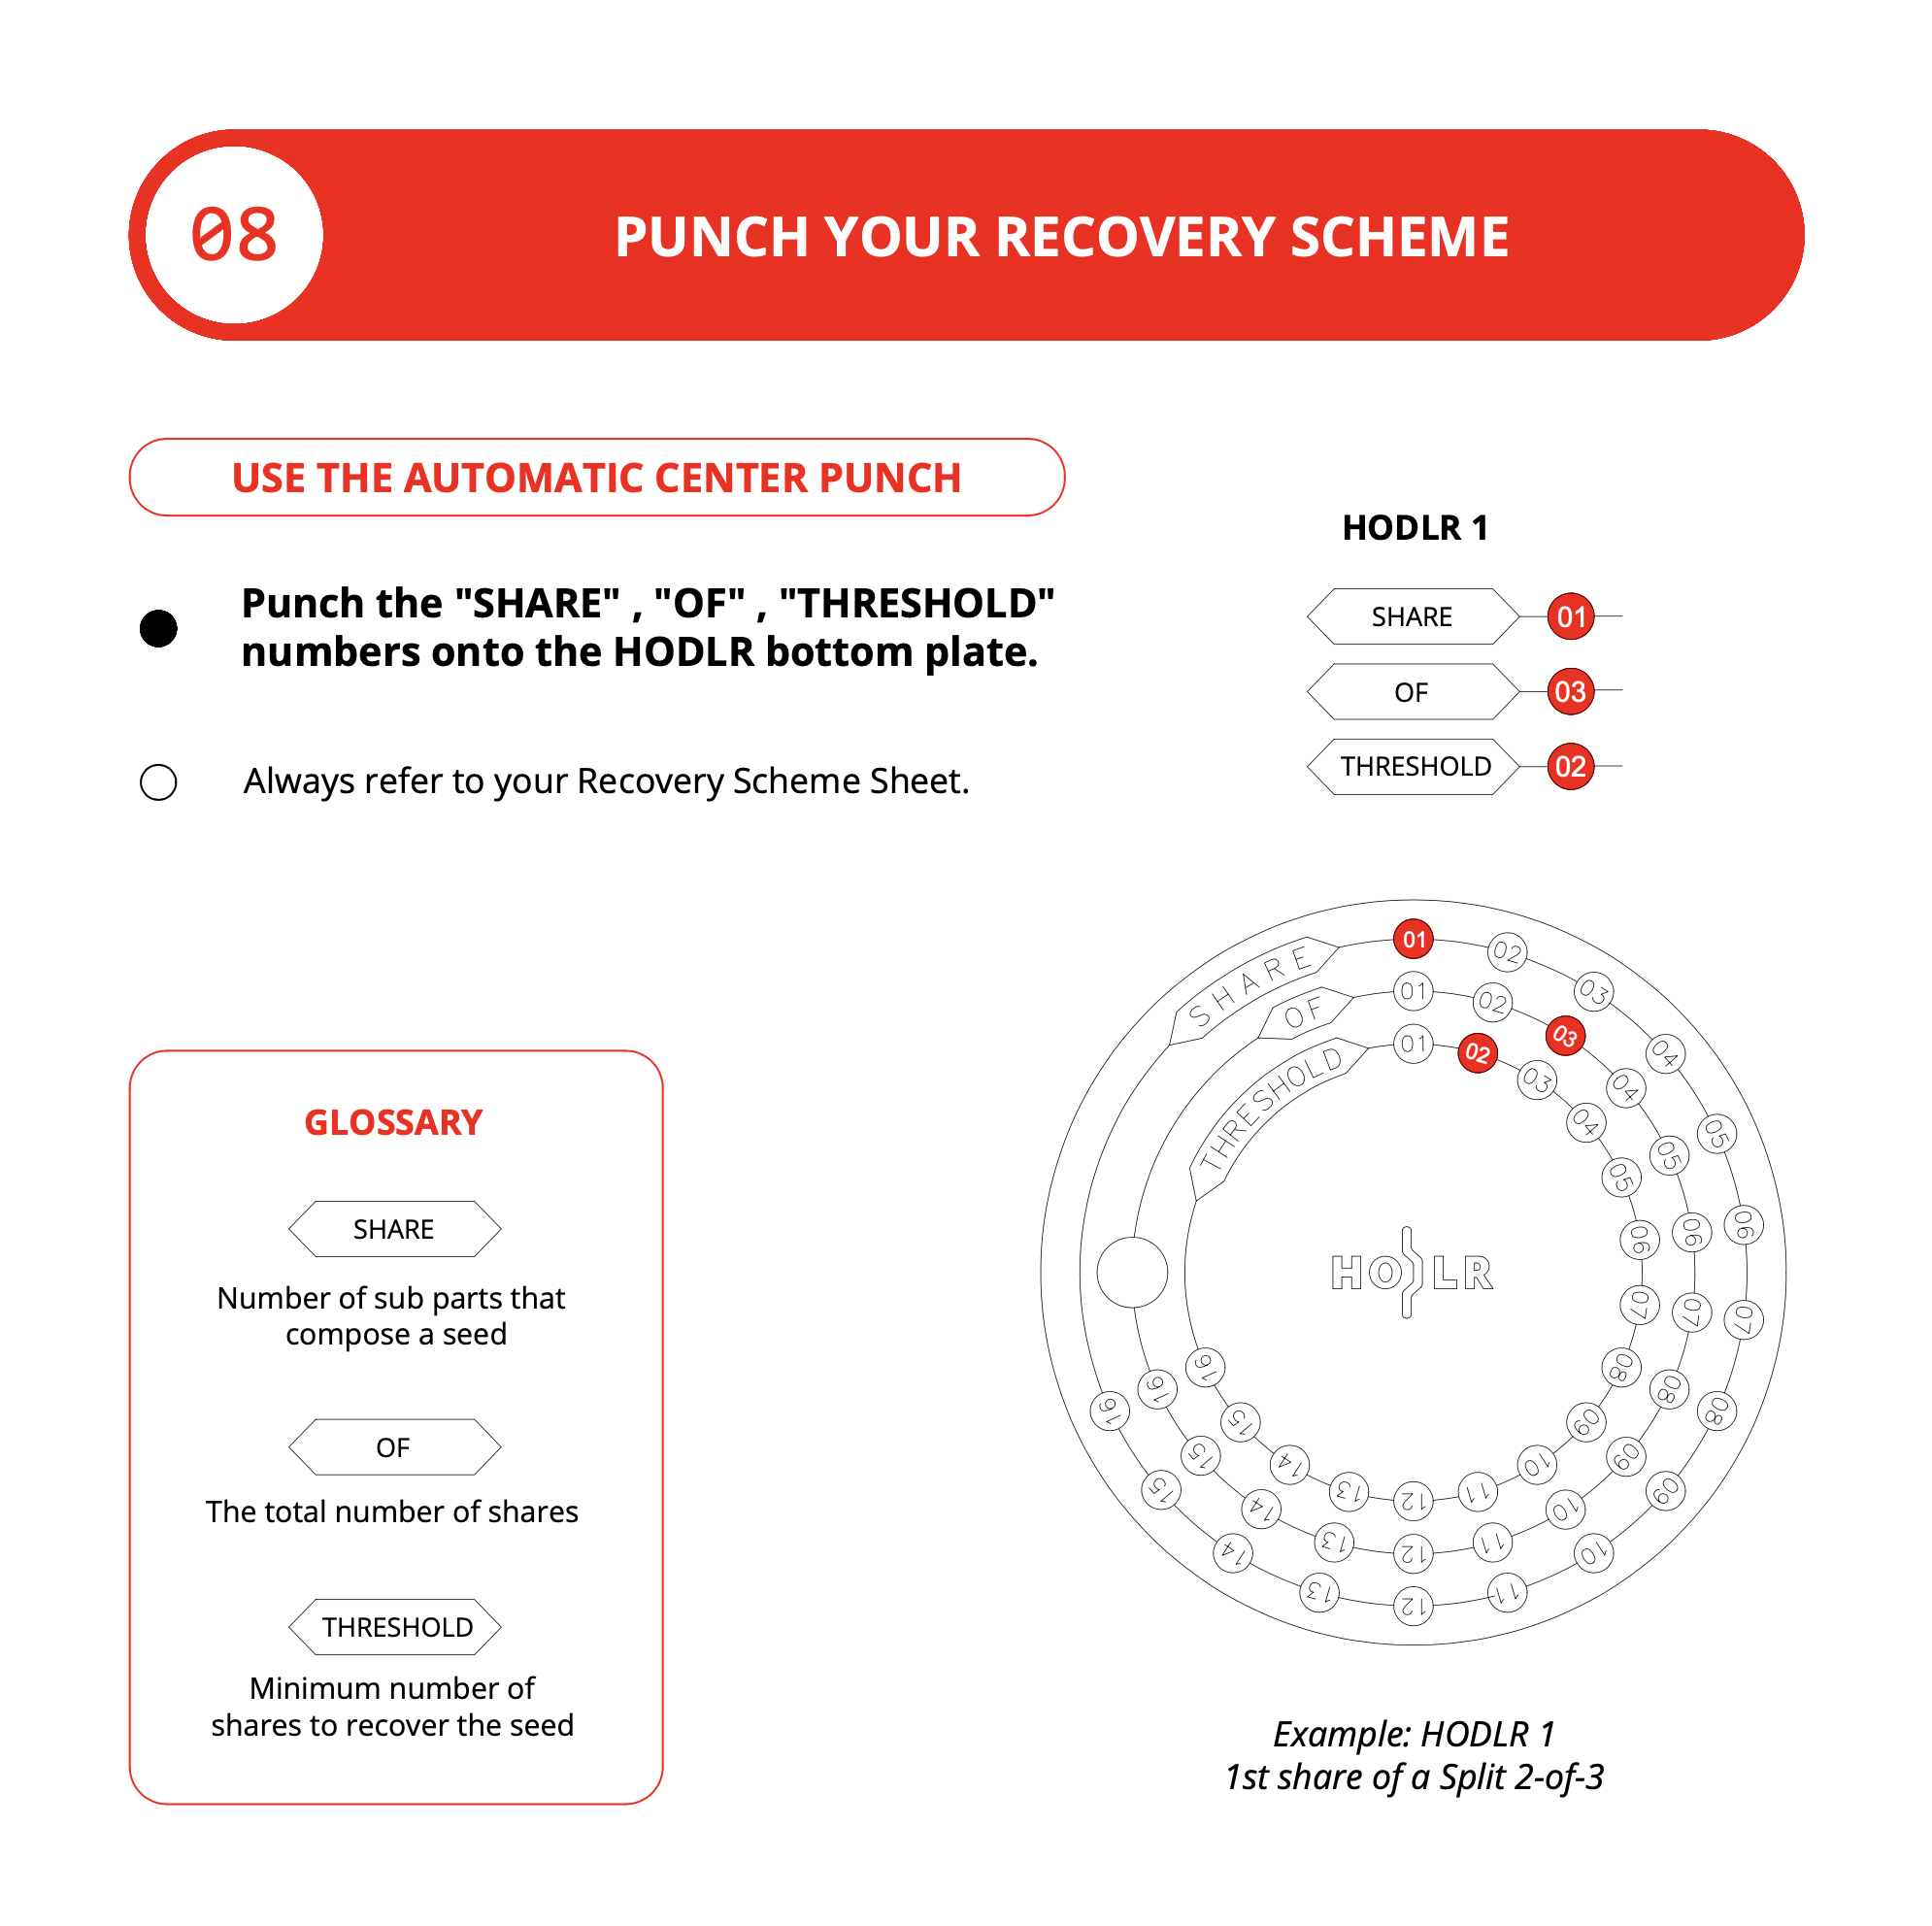 HODLR Disks Protocol - Step 8 - Punch your recovery scheme